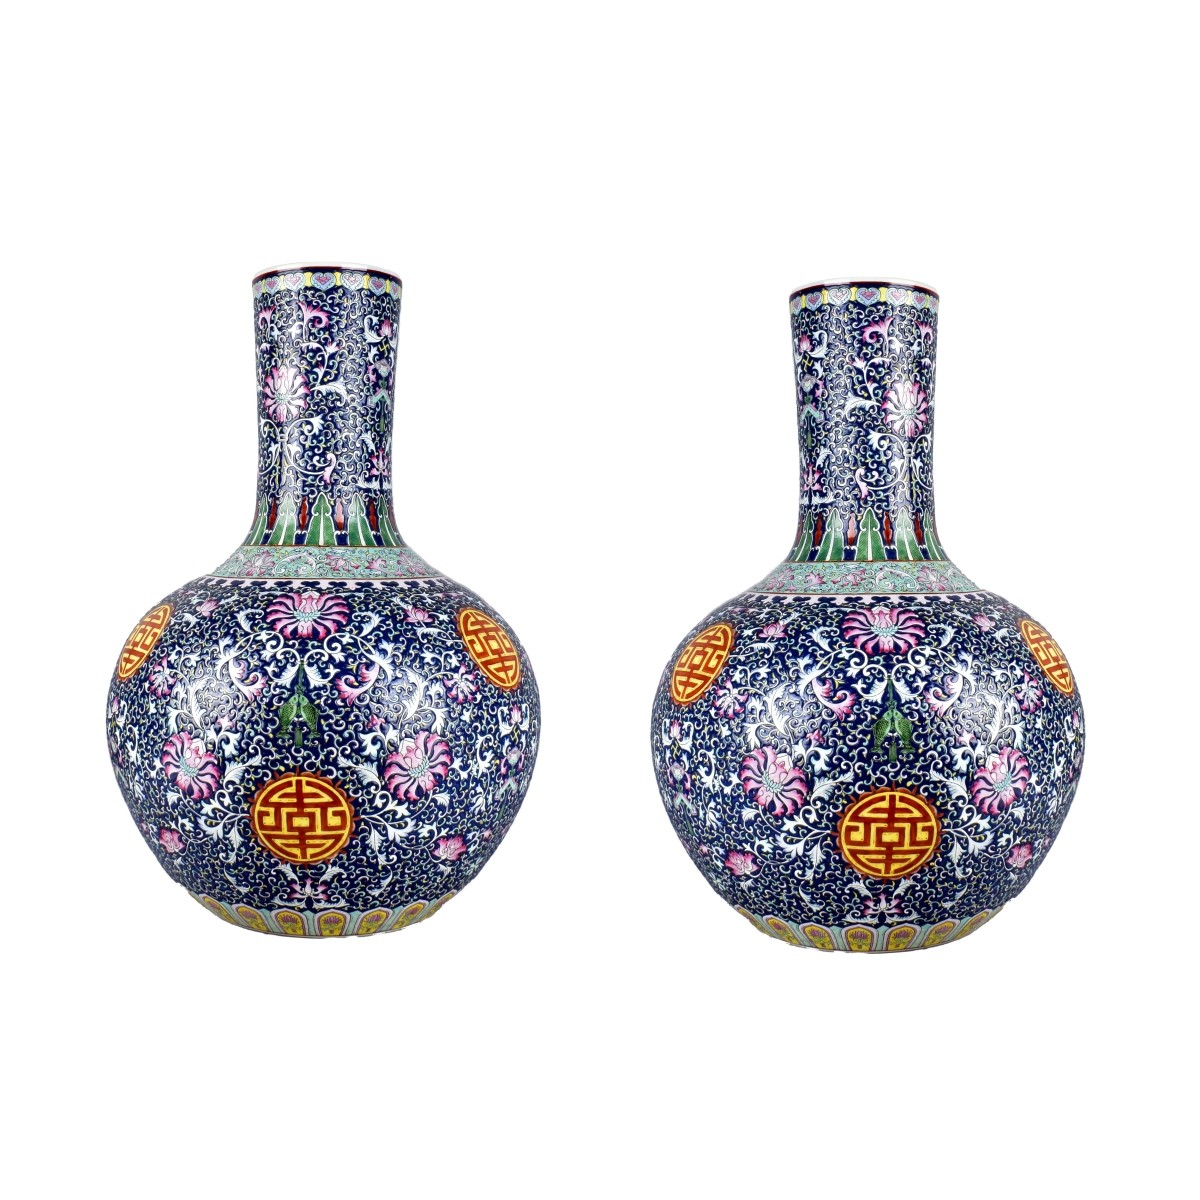 Pair of Large Chinese Porcelain Vases